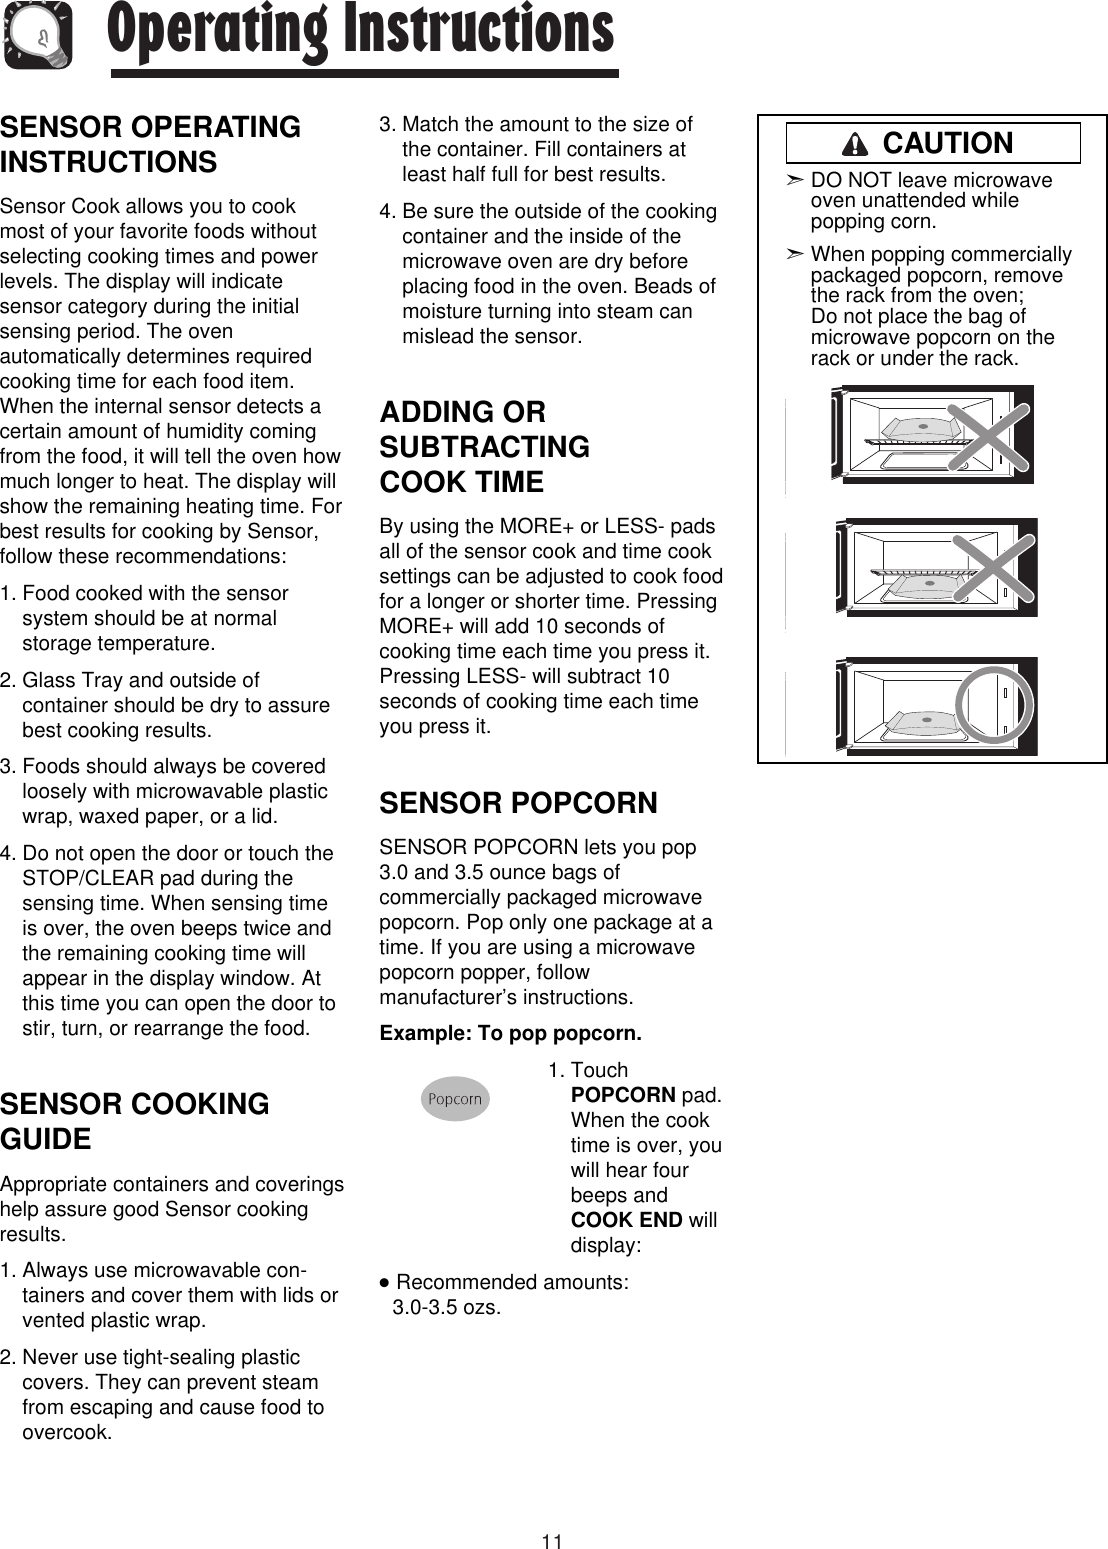 11Operating InstructionsSENSOR OPERATINGINSTRUCTIONSSensor Cook allows you to cookmost of your favorite foods withoutselecting cooking times and powerlevels. The display will indicatesensor category during the initialsensing period. The ovenautomatically determines requiredcooking time for each food item.When the internal sensor detects acertain amount of humidity comingfrom the food, it will tell the oven howmuch longer to heat. The display willshow the remaining heating time. Forbest results for cooking by Sensor,follow these recommendations:1. Food cooked with the sensorsystem should be at normalstorage temperature.2. Glass Tray and outside ofcontainer should be dry to assurebest cooking results.3. Foods should always be coveredloosely with microwavable plasticwrap, waxed paper, or a lid.4. Do not open the door or touch theSTOP/CLEAR pad during thesensing time. When sensing timeis over, the oven beeps twice andthe remaining cooking time willappear in the display window. Atthis time you can open the door tostir, turn, or rearrange the food.SENSOR COOKINGGUIDEAppropriate containers and coveringshelp assure good Sensor cookingresults.1. Always use microwavable con-tainers and cover them with lids orvented plastic wrap.2. Never use tight-sealing plasticcovers. They can prevent steamfrom escaping and cause food toovercook.3. Match the amount to the size ofthe container. Fill containers atleast half full for best results.4. Be sure the outside of the cookingcontainer and the inside of themicrowave oven are dry beforeplacing food in the oven. Beads ofmoisture turning into steam canmislead the sensor.ADDING ORSUBTRACTING COOK TIMEBy using the MORE+ or LESS- padsall of the sensor cook and time cooksettings can be adjusted to cook foodfor a longer or shorter time. PressingMORE+ will add 10 seconds ofcooking time each time you press it.Pressing LESS- will subtract 10seconds of cooking time each timeyou press it.SENSOR POPCORN        SENSOR POPCORN lets you pop3.0 and 3.5 ounce bags ofcommercially packaged microwavepopcorn. Pop only one package at atime. If you are using a microwavepopcorn popper, followmanufacturer’s instructions. Example: To pop popcorn.1. TouchPOPCORN pad.When the cooktime is over, youwill hear fourbeeps andCOOK END willdisplay:●  Recommended amounts: 3.0-3.5 ozs.➣DO NOT leave microwaveoven unattended whilepopping corn.➣When popping commerciallypackaged popcorn, removethe rack from the oven; Do not place the bag ofmicrowave popcorn on therack or under the rack.CAUTION